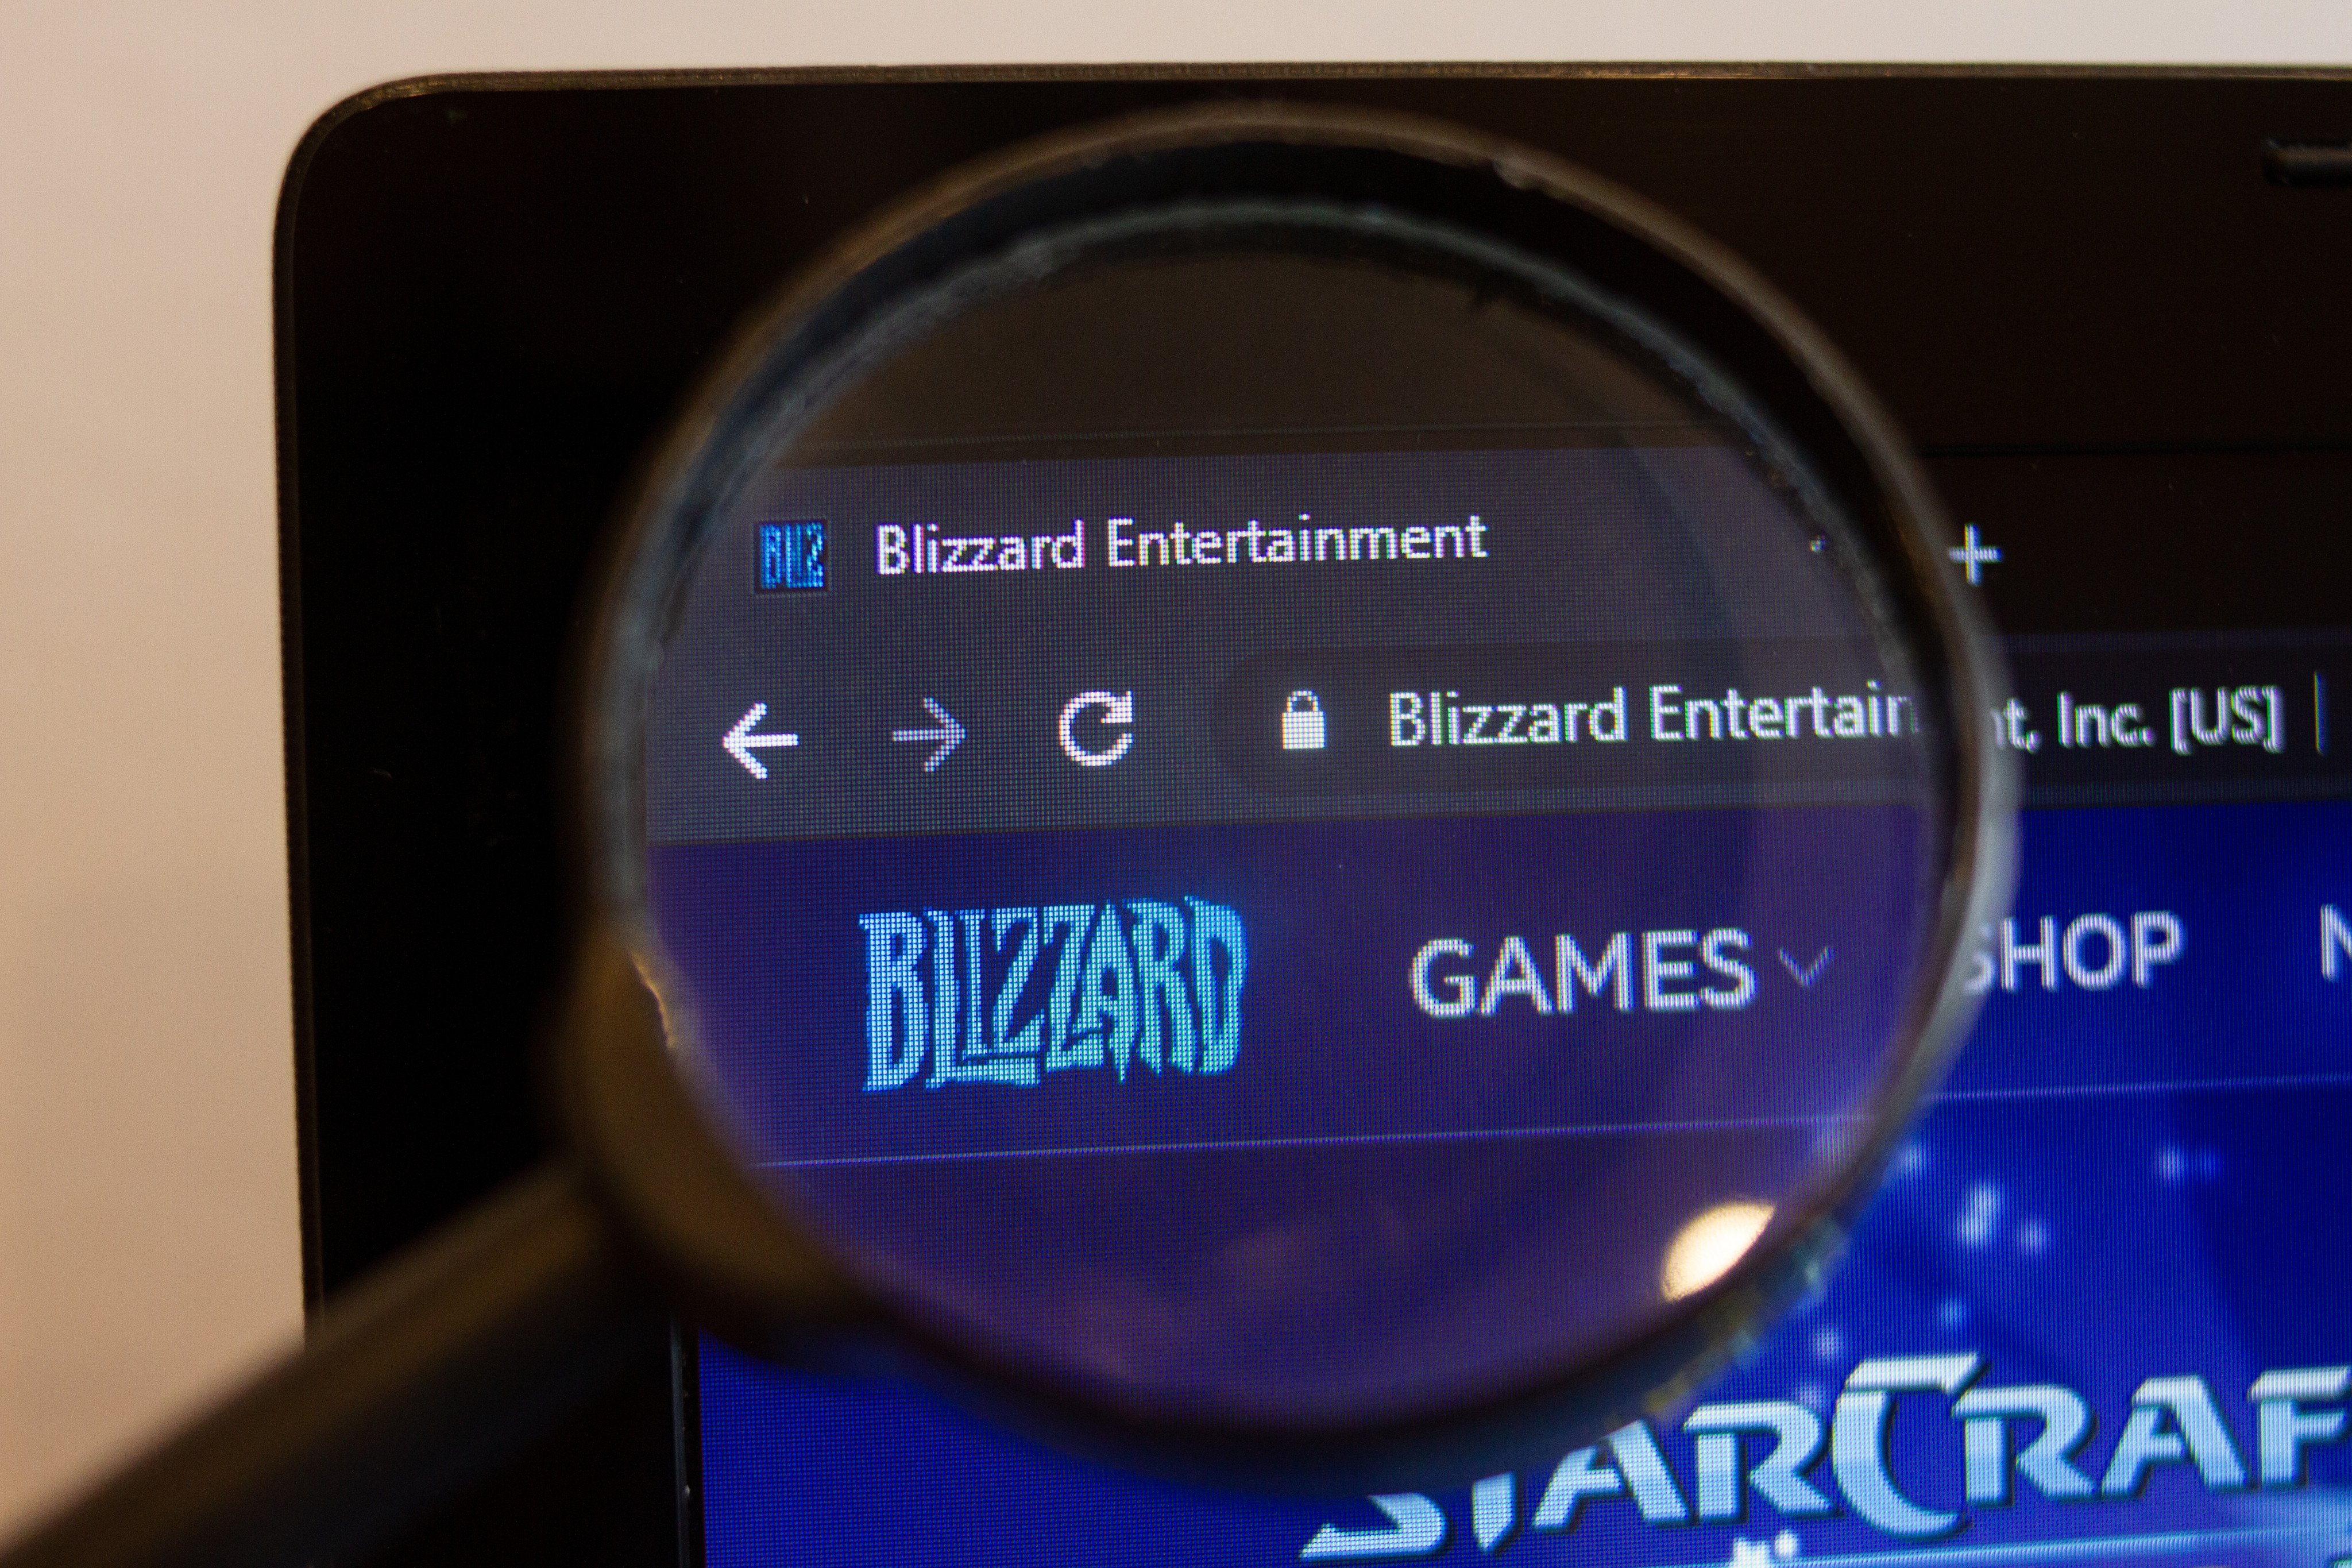 Operations of popular Blizzard Entertainment video games on the mainland, including World of Warcraft and Overwatch, will be suspended from January 23. Photo: Shutterstock